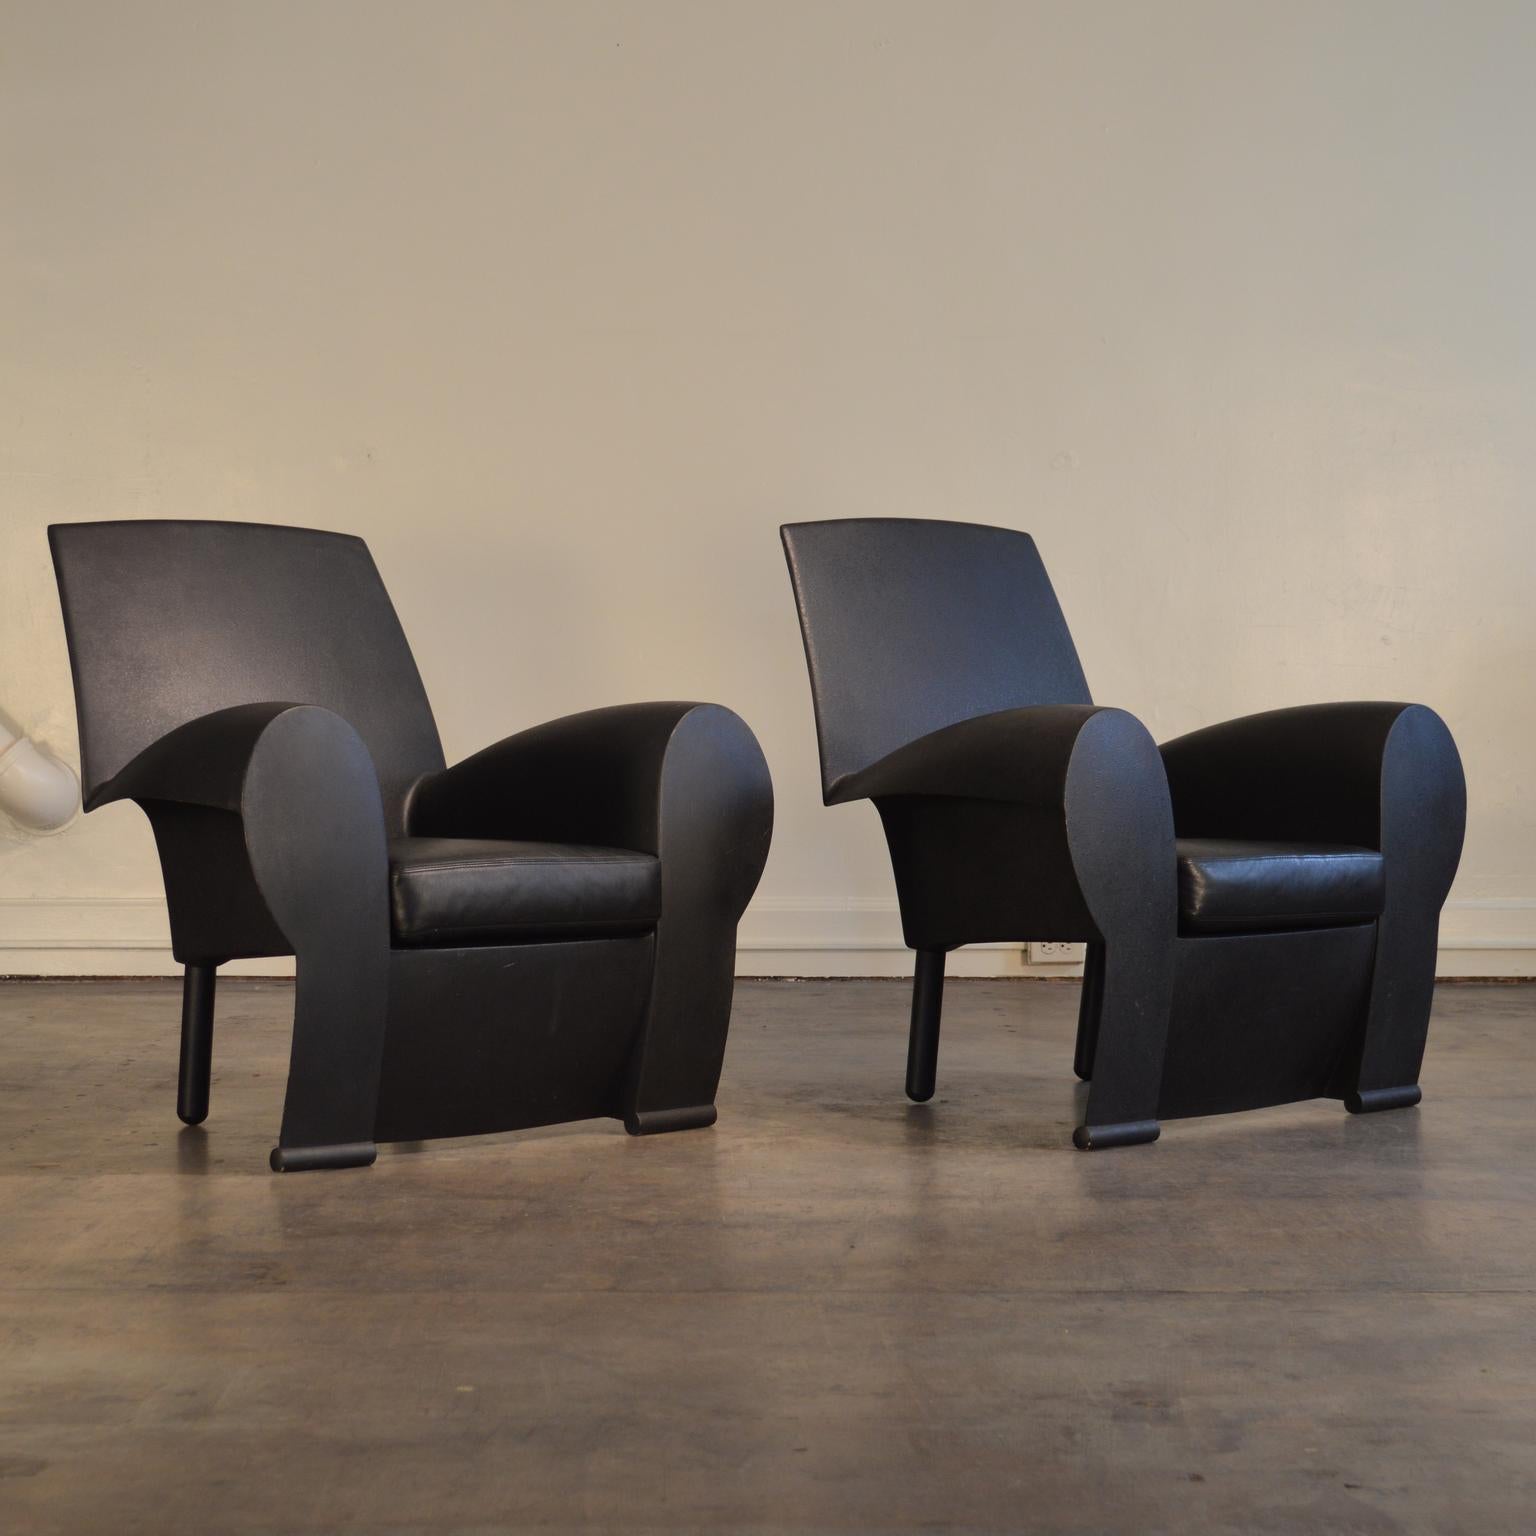 A vintage pair of Richard III chairs by Philippe Starck. Moulded frames covered in polyurethane enamel. An early Starck design, it demonstrates his knack for both utilizing and up-ending traditional forms. From the front, the Richard III presents as